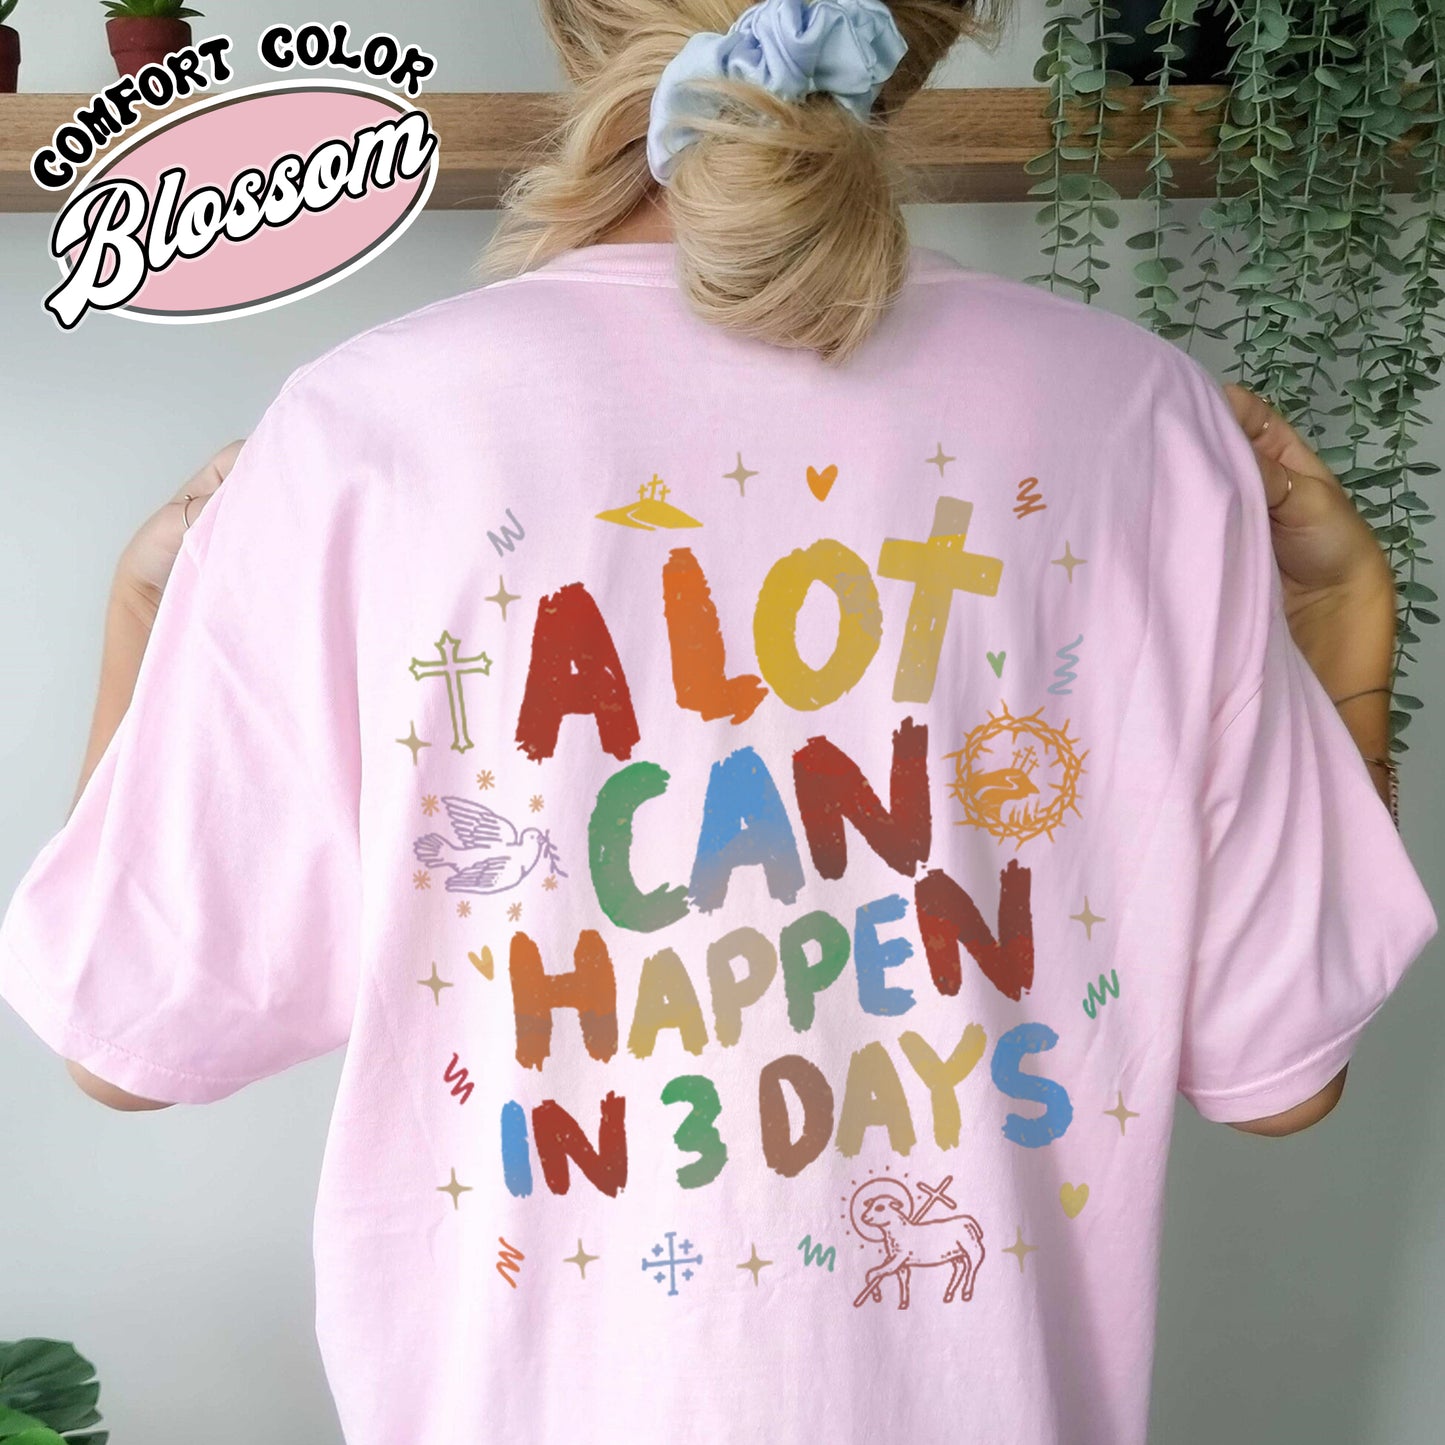 A Lot Can Happen in 3 Days Easter Comfort Color Shirt, Happy Easter, Christian Shirt, He Is Risen Shirt